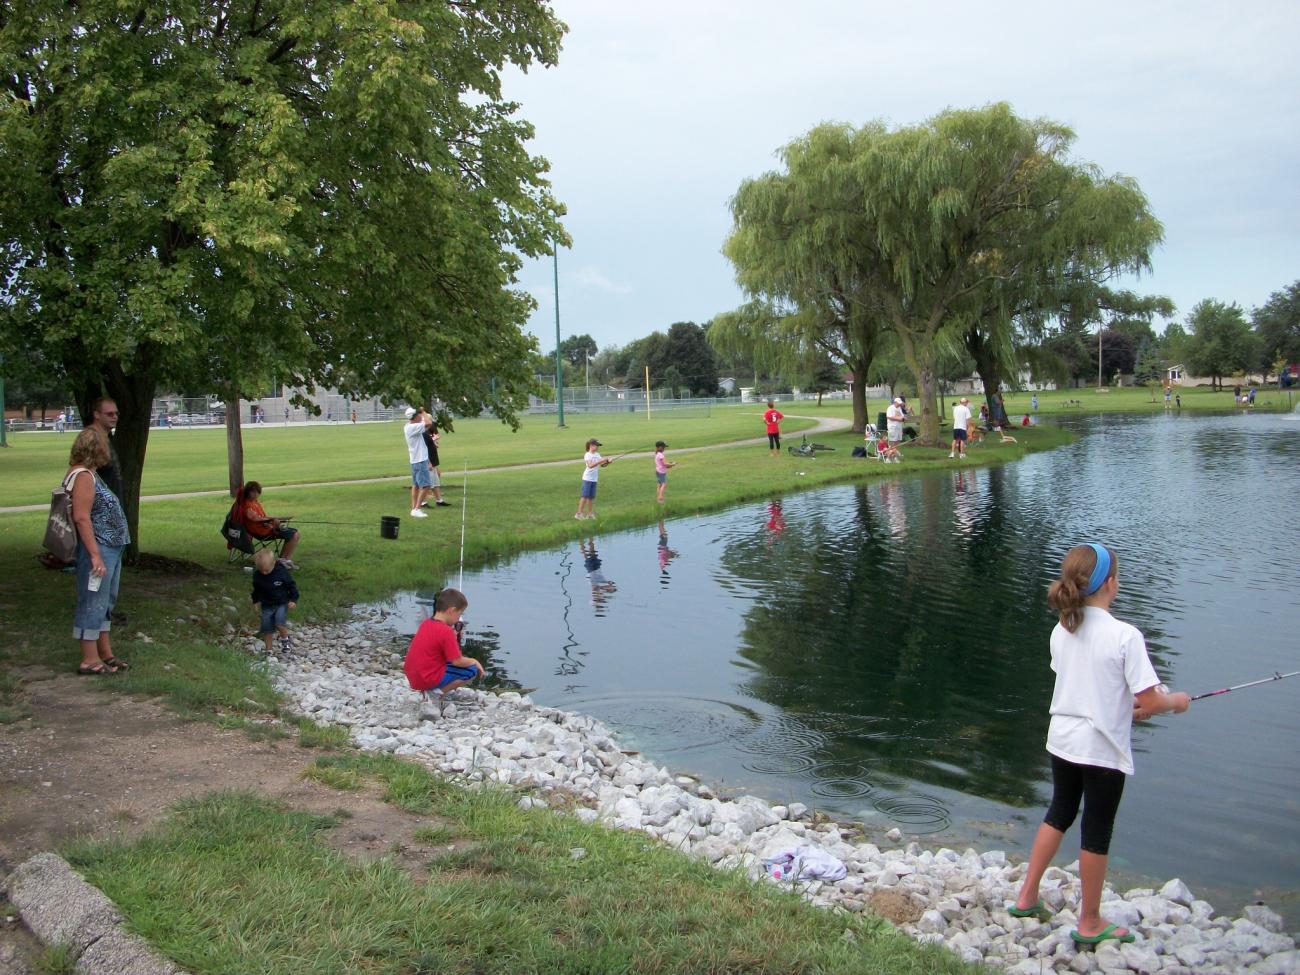 Kids' Fishing Contest with Highland Parks (ages 6-13)